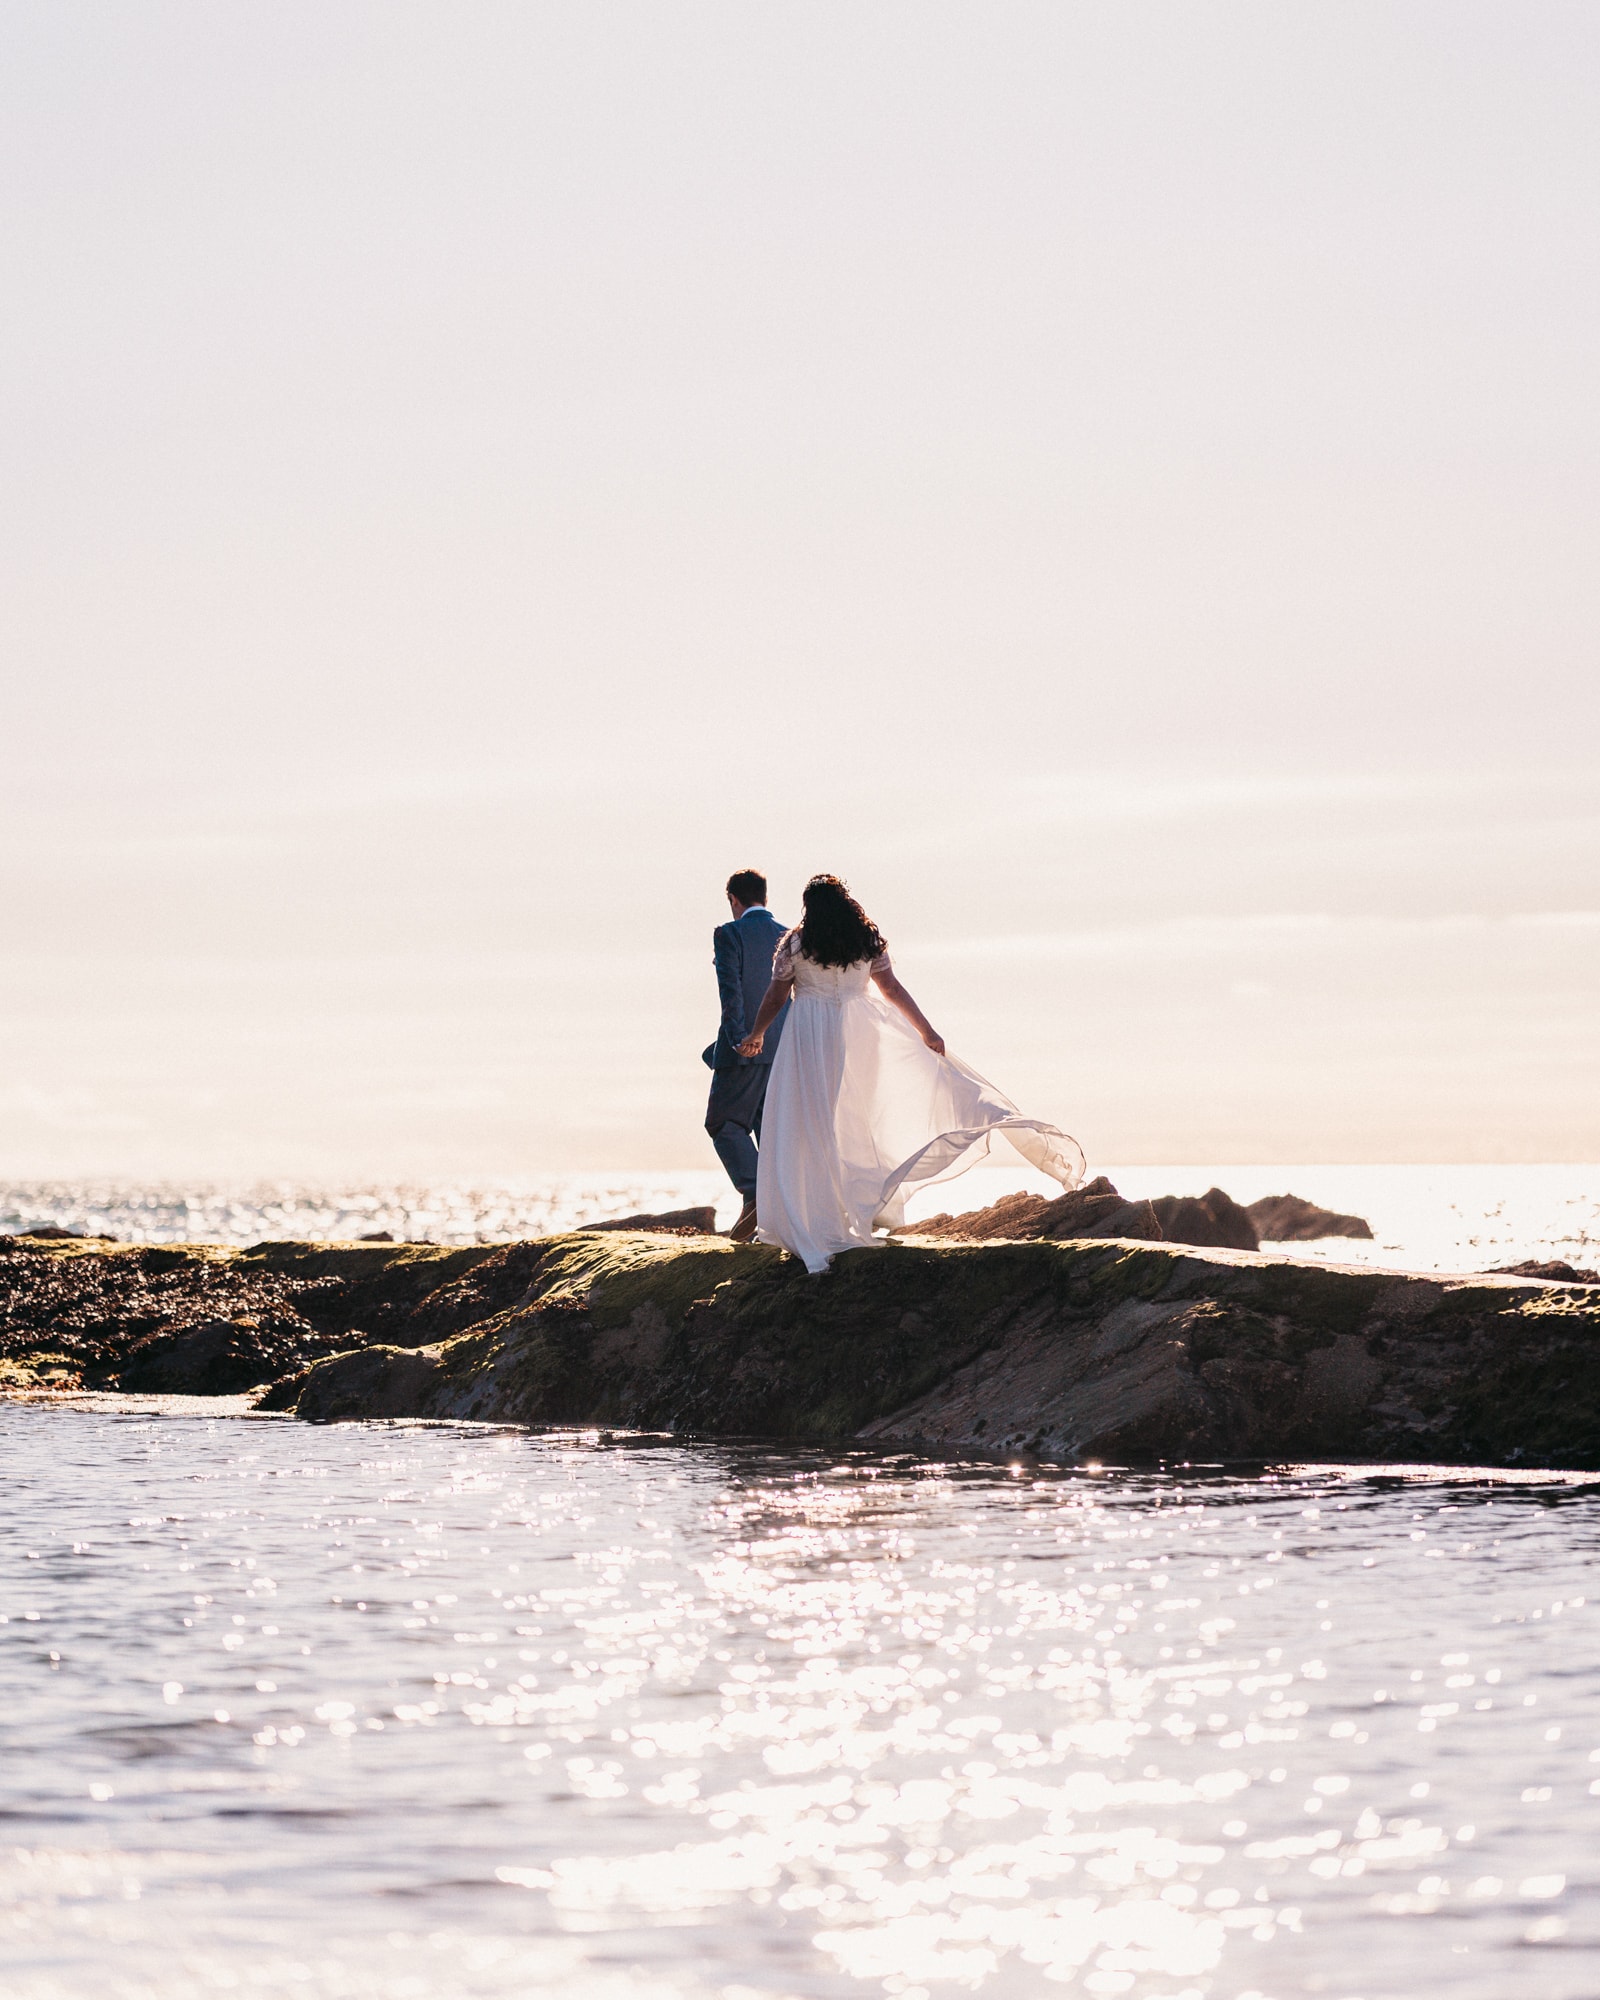 Welcome to Wildly in Love Wedding Photography Nov 2022 (Image Header) Wildly in Love